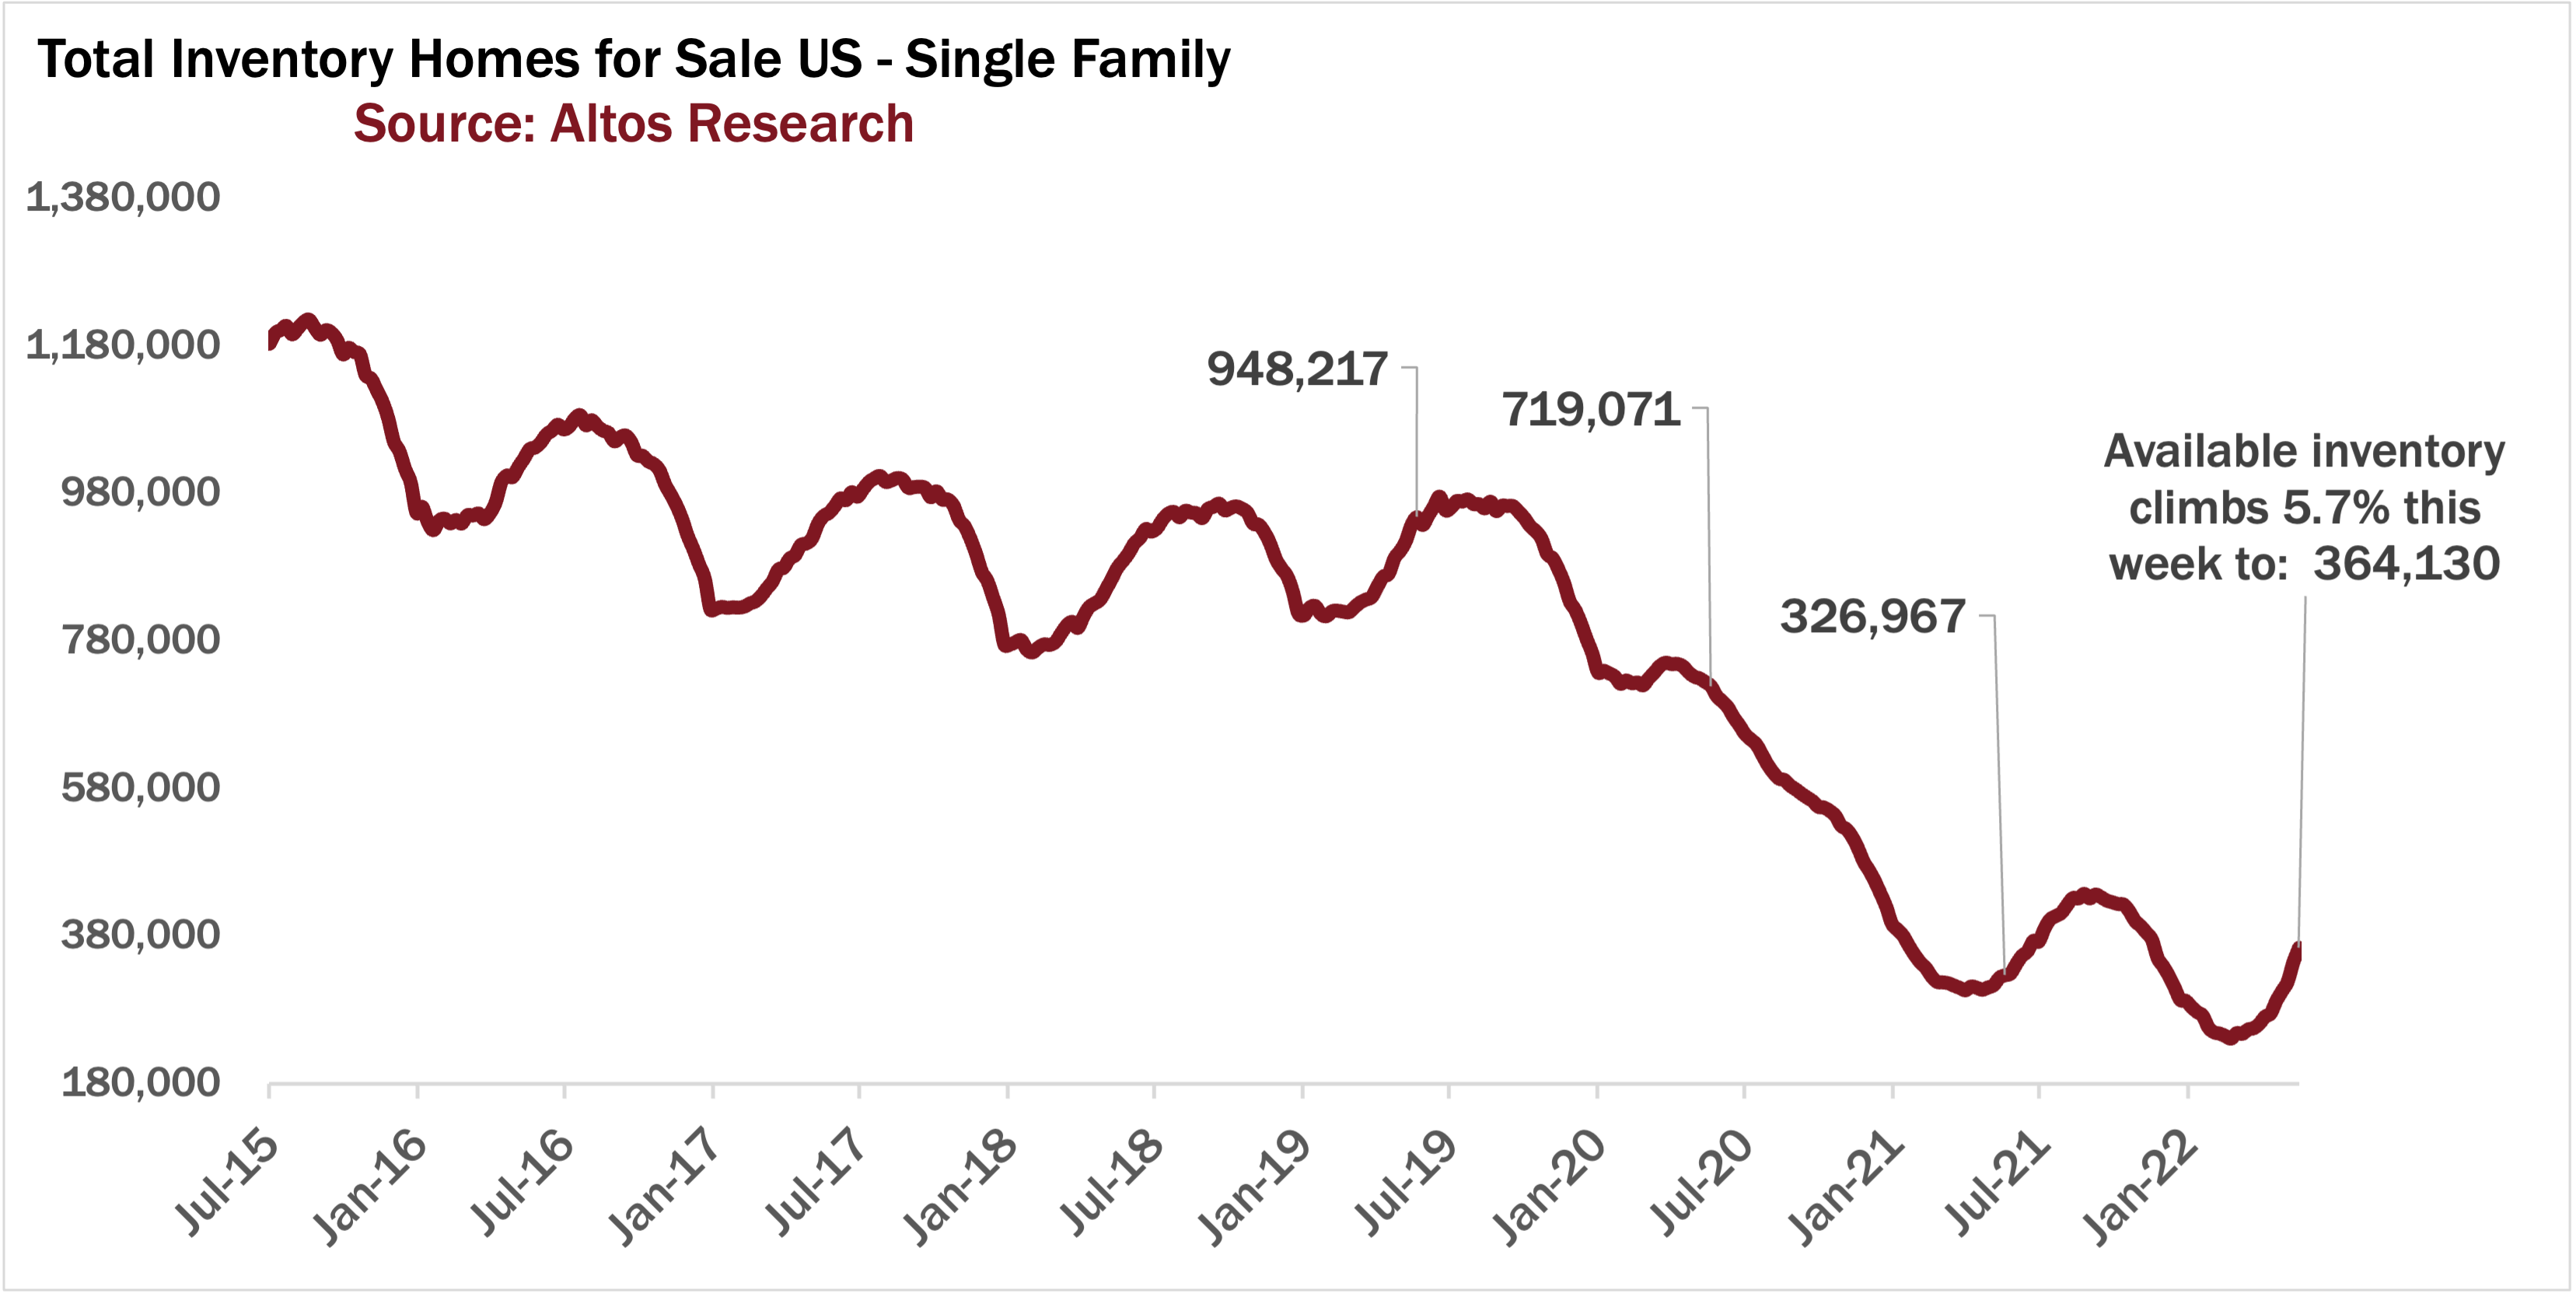 US Real Estate Inventory, May 29, 2022